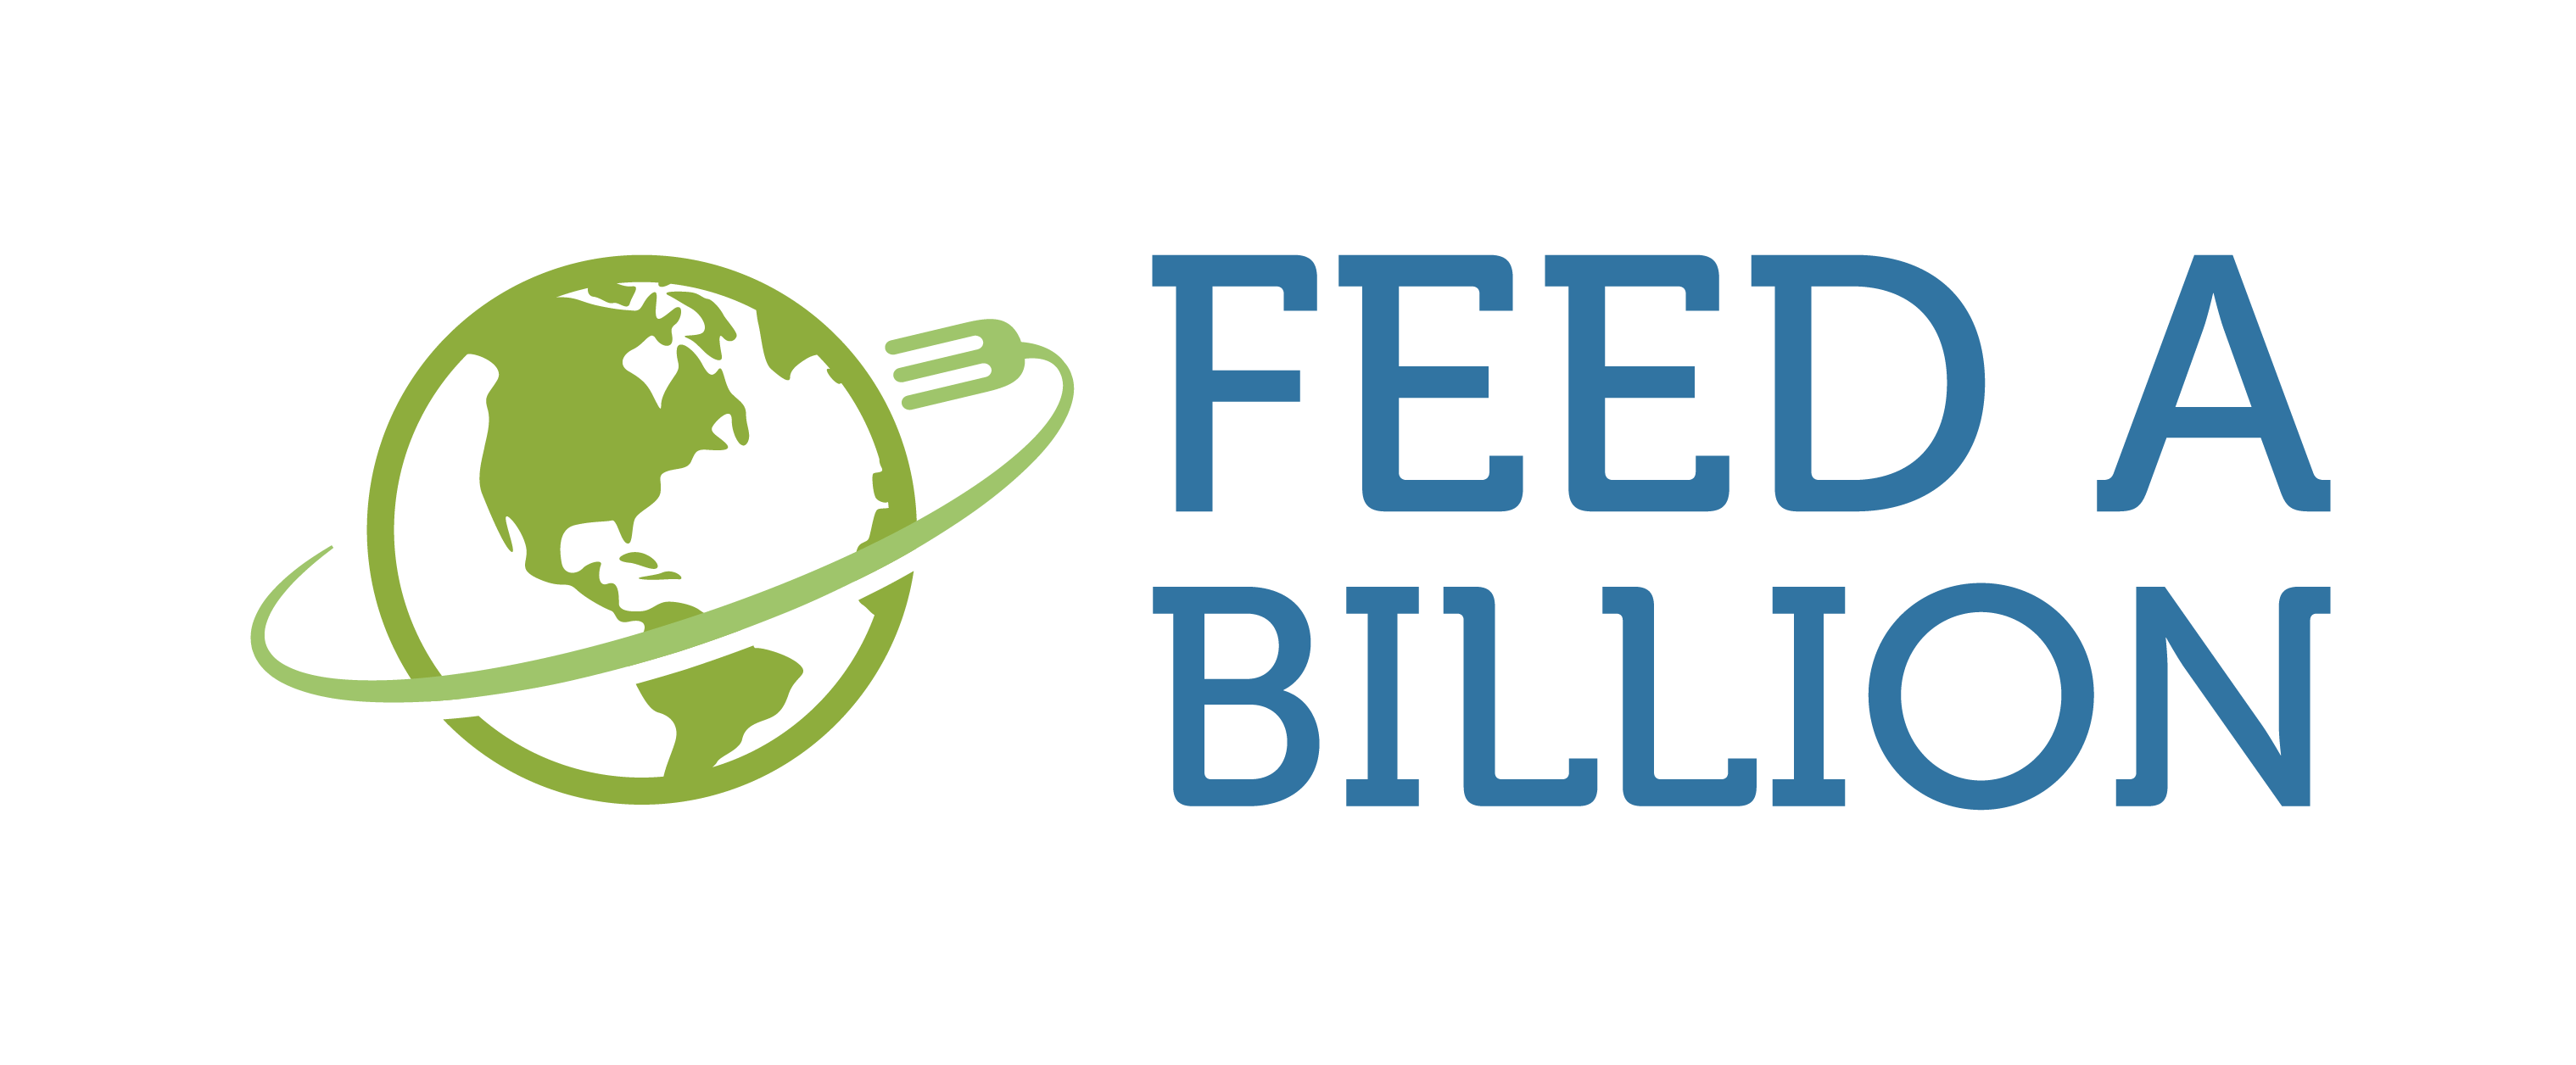 Let's End World Hunger By Providing a Billion Meals | Feed A Billion